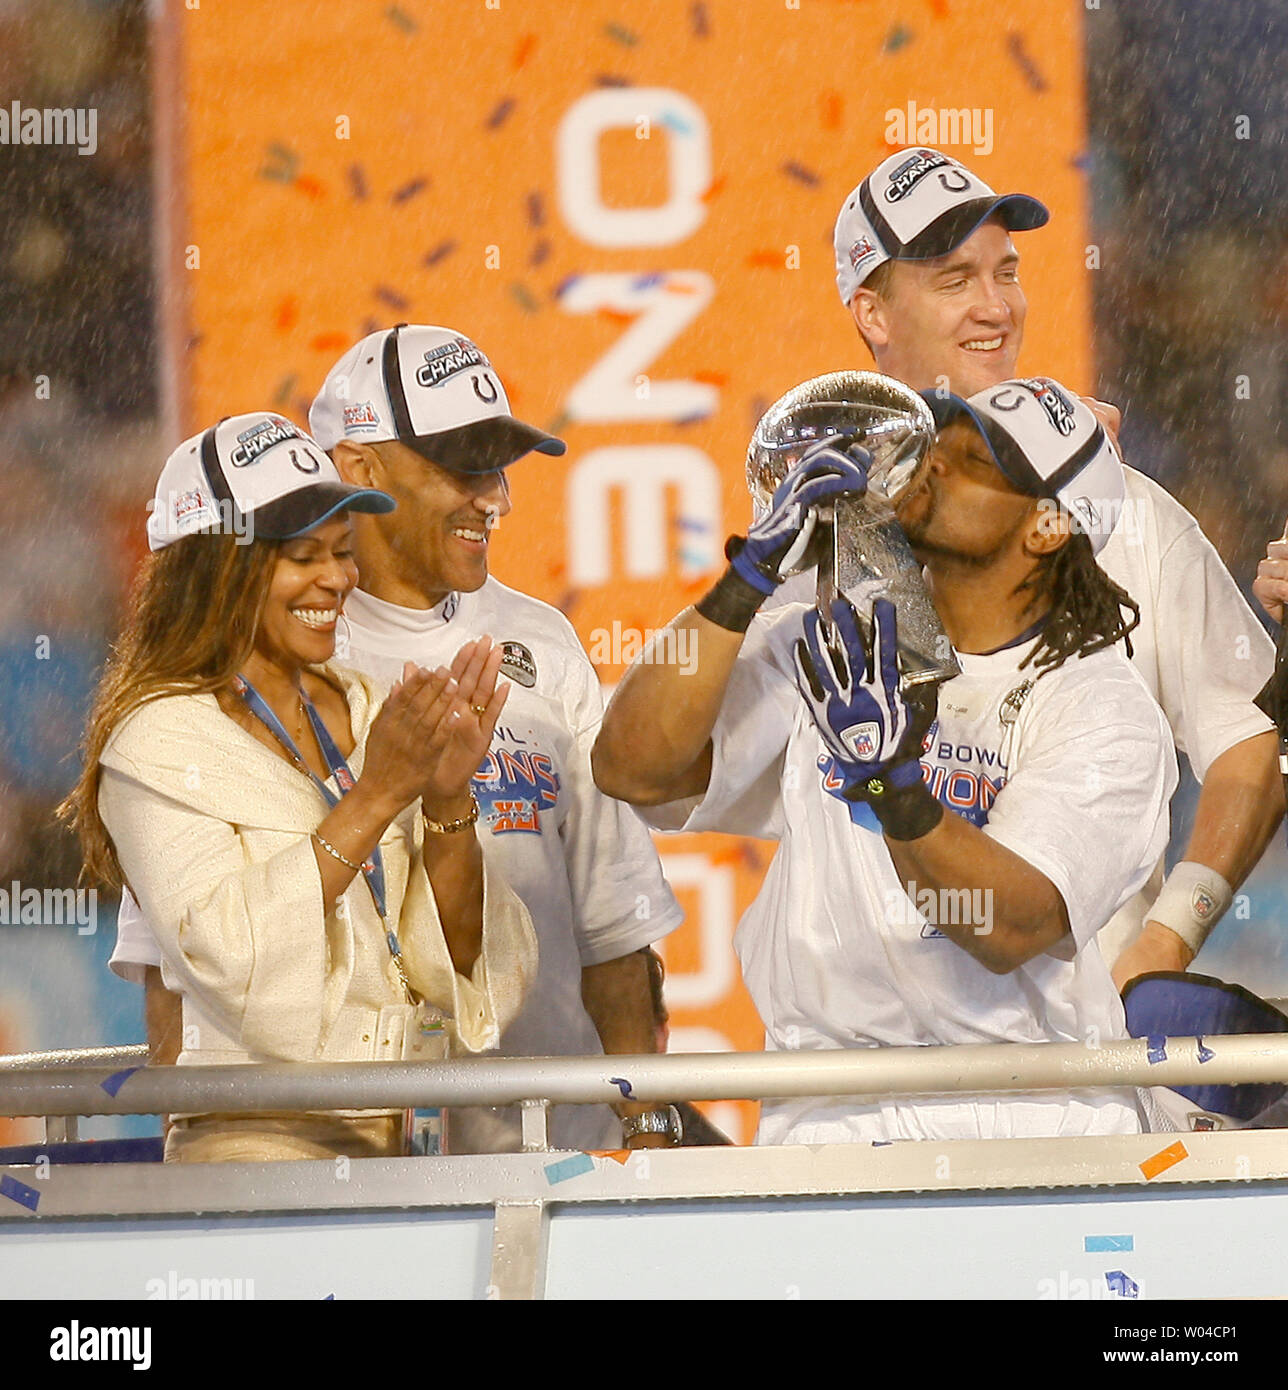 Indianapolis Colts Bob Sanders kisses the Vince Lombardi trophy as coach  Tony Dungy, his wife and Peyton Manning look on at Super Bowl XLI at  Dolphin Stadium in Miami on February 4,